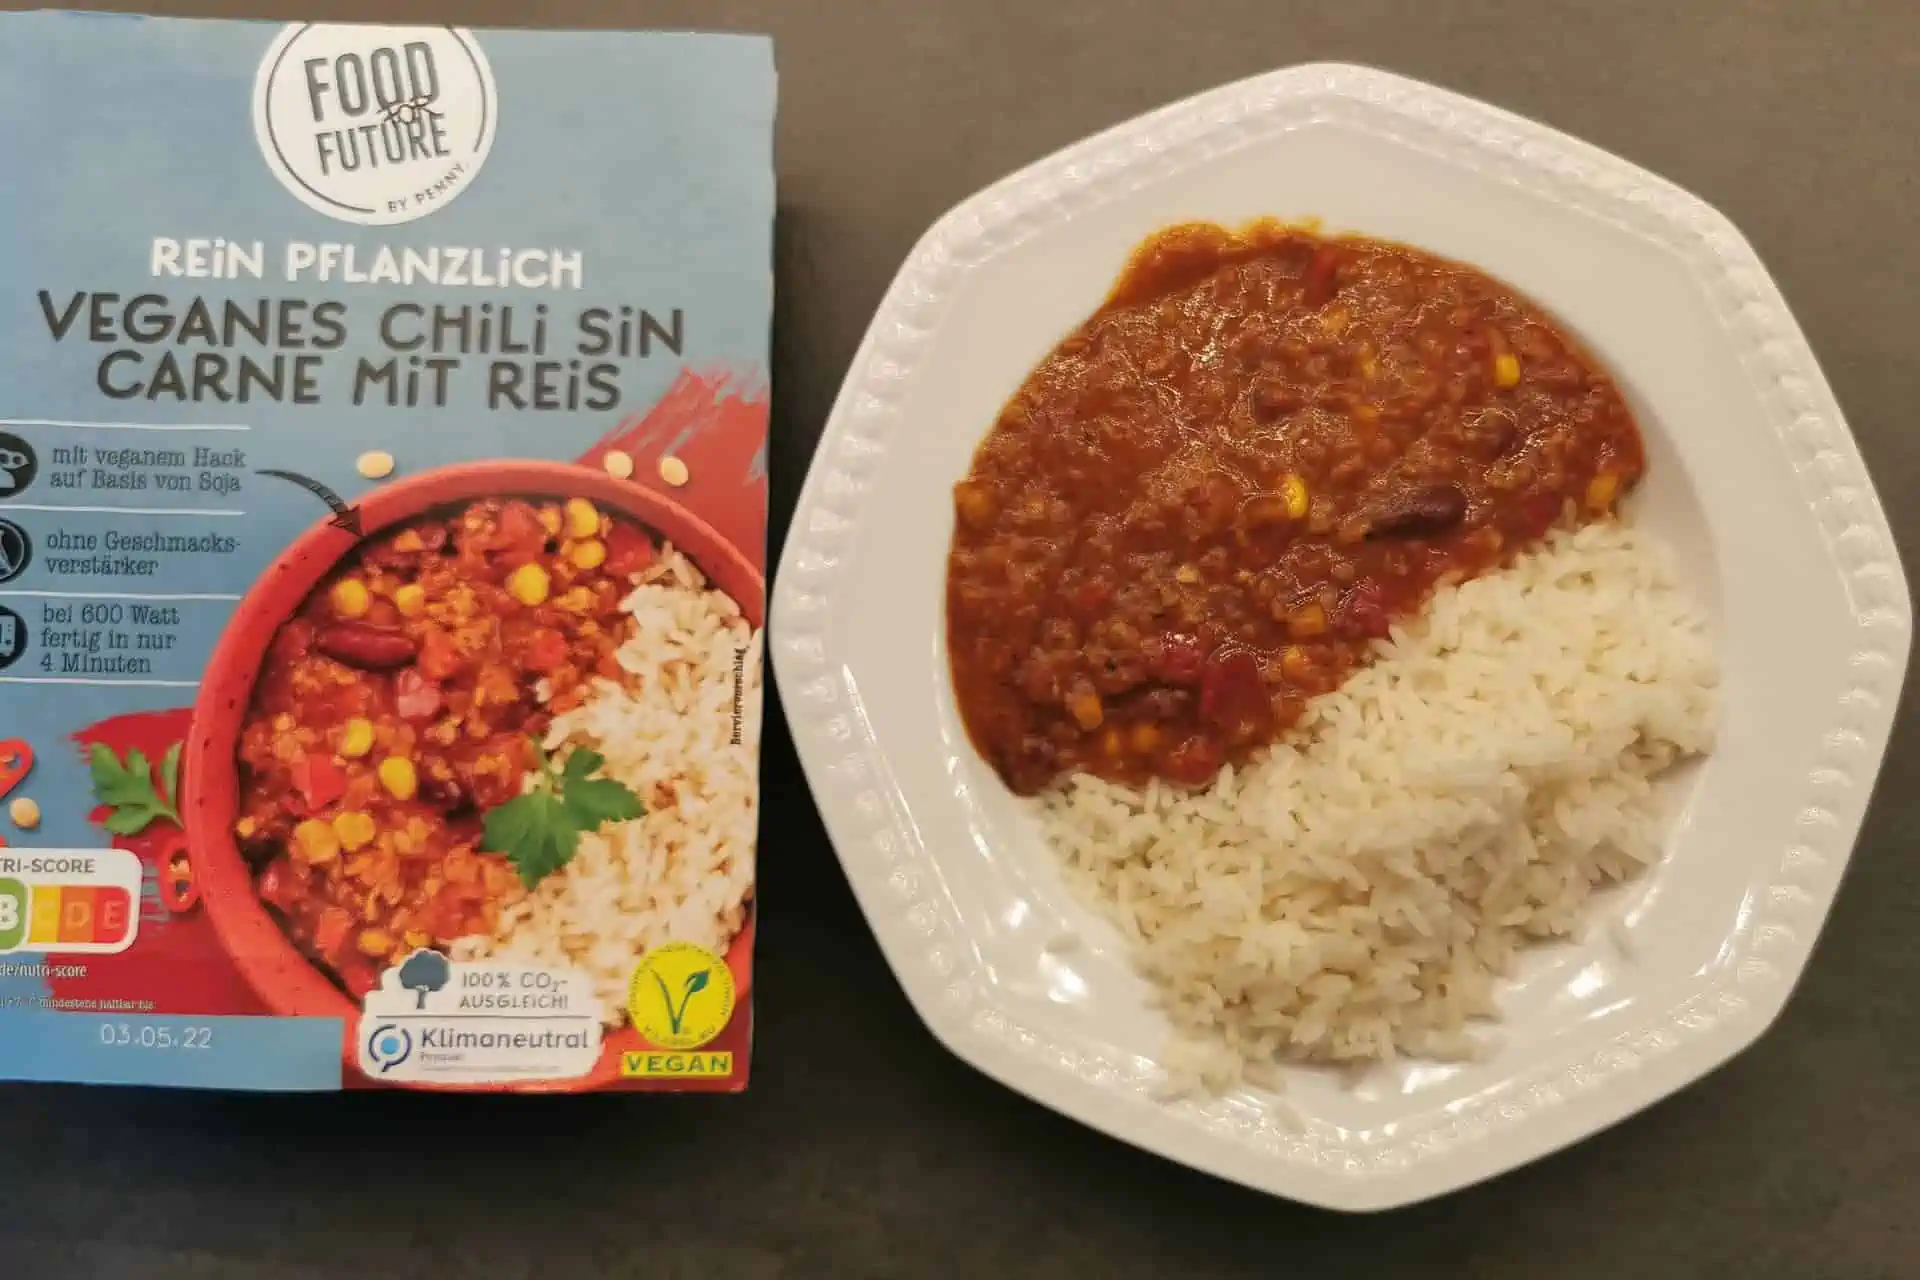 Food for Future: Veganes Chili sin Carne